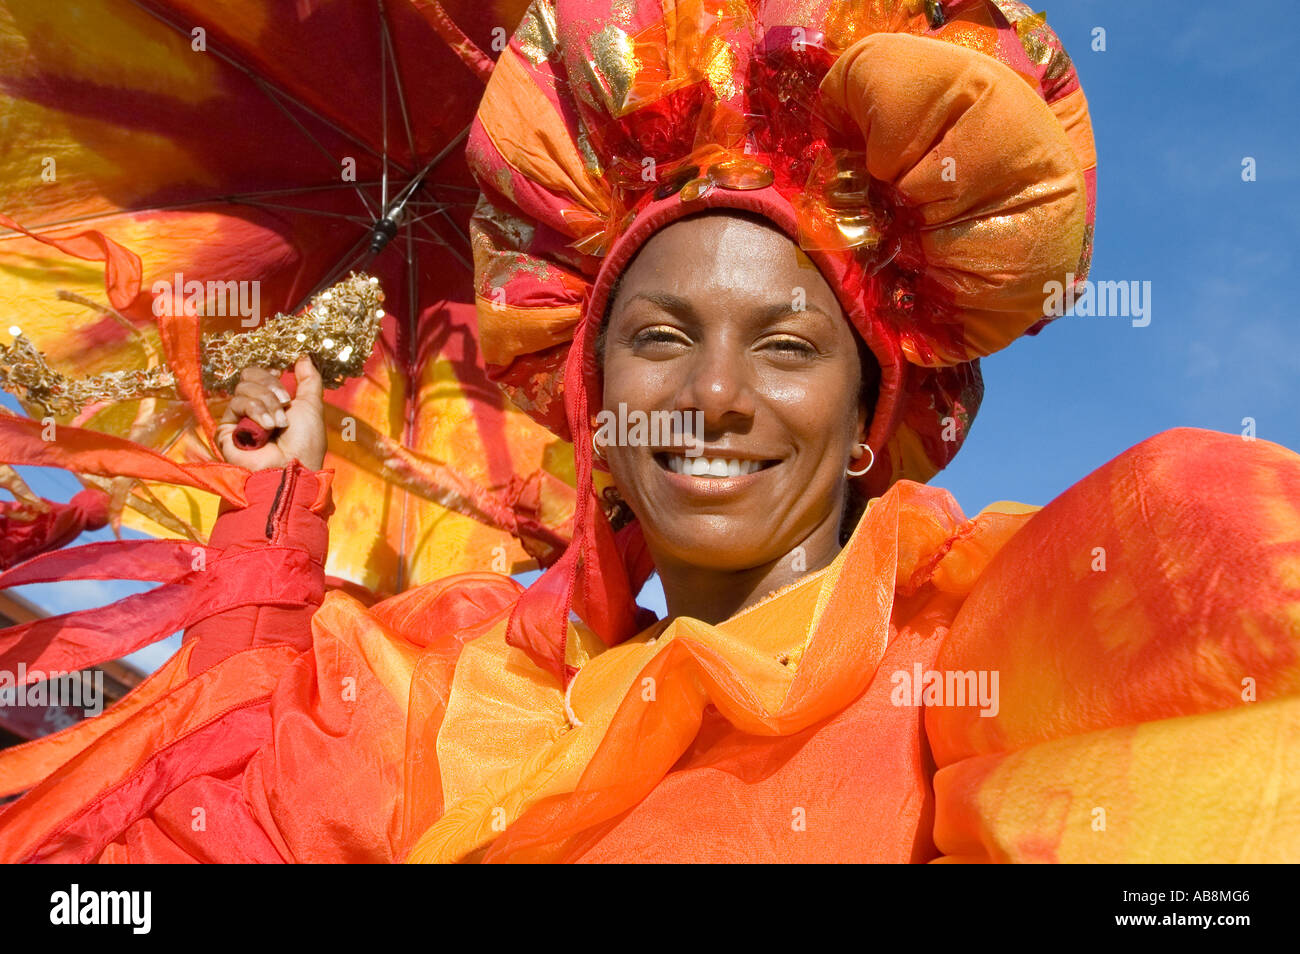 West Indies Port of Spain Trinidad Carnival Portrait of celebrating female dancer on mainstage in colorful costume. Stock Photo